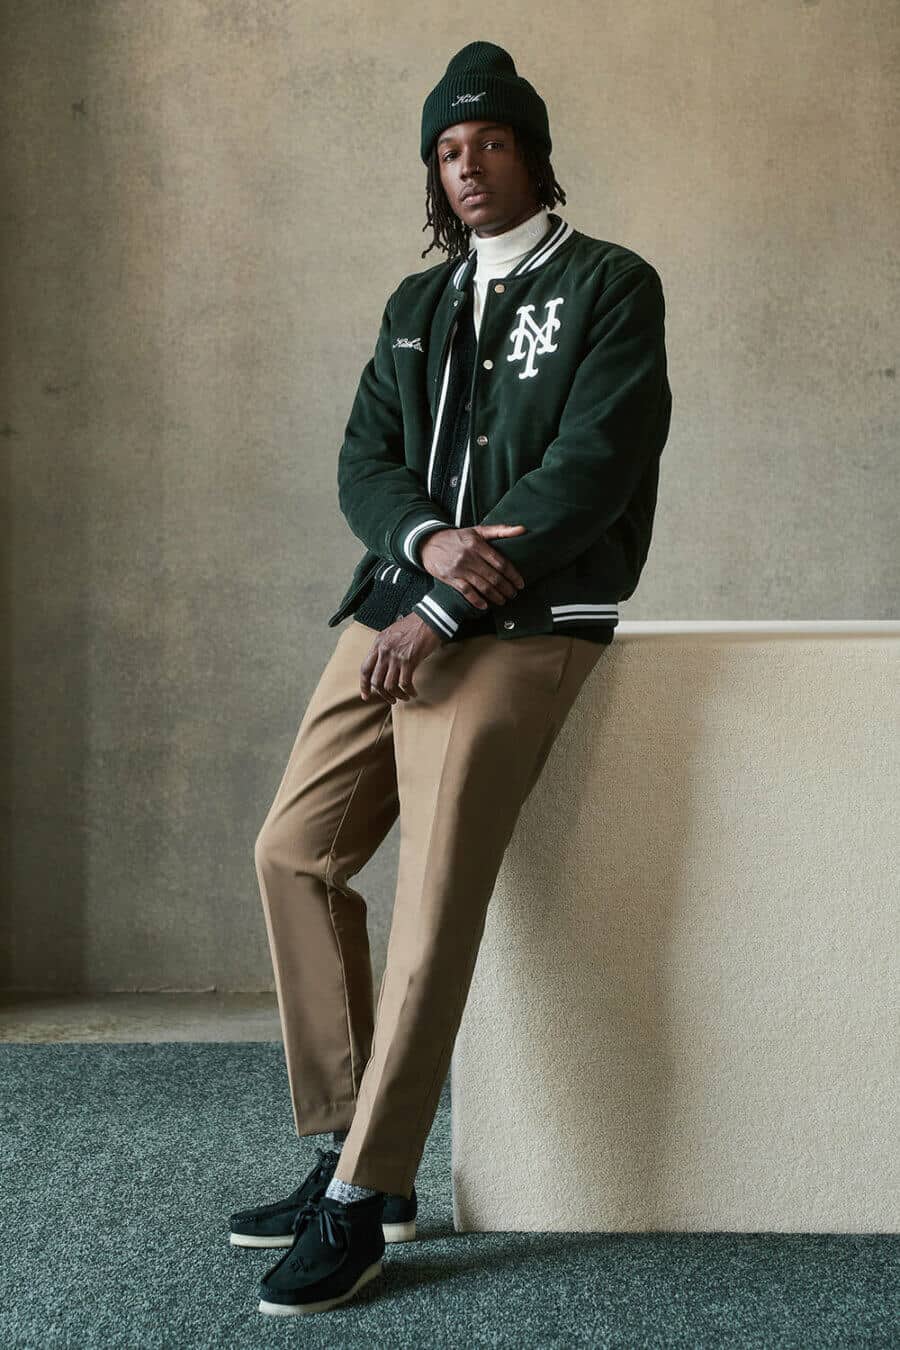 Men's khaki pants, white roll neck, green varsity jacket and suede boots outfit